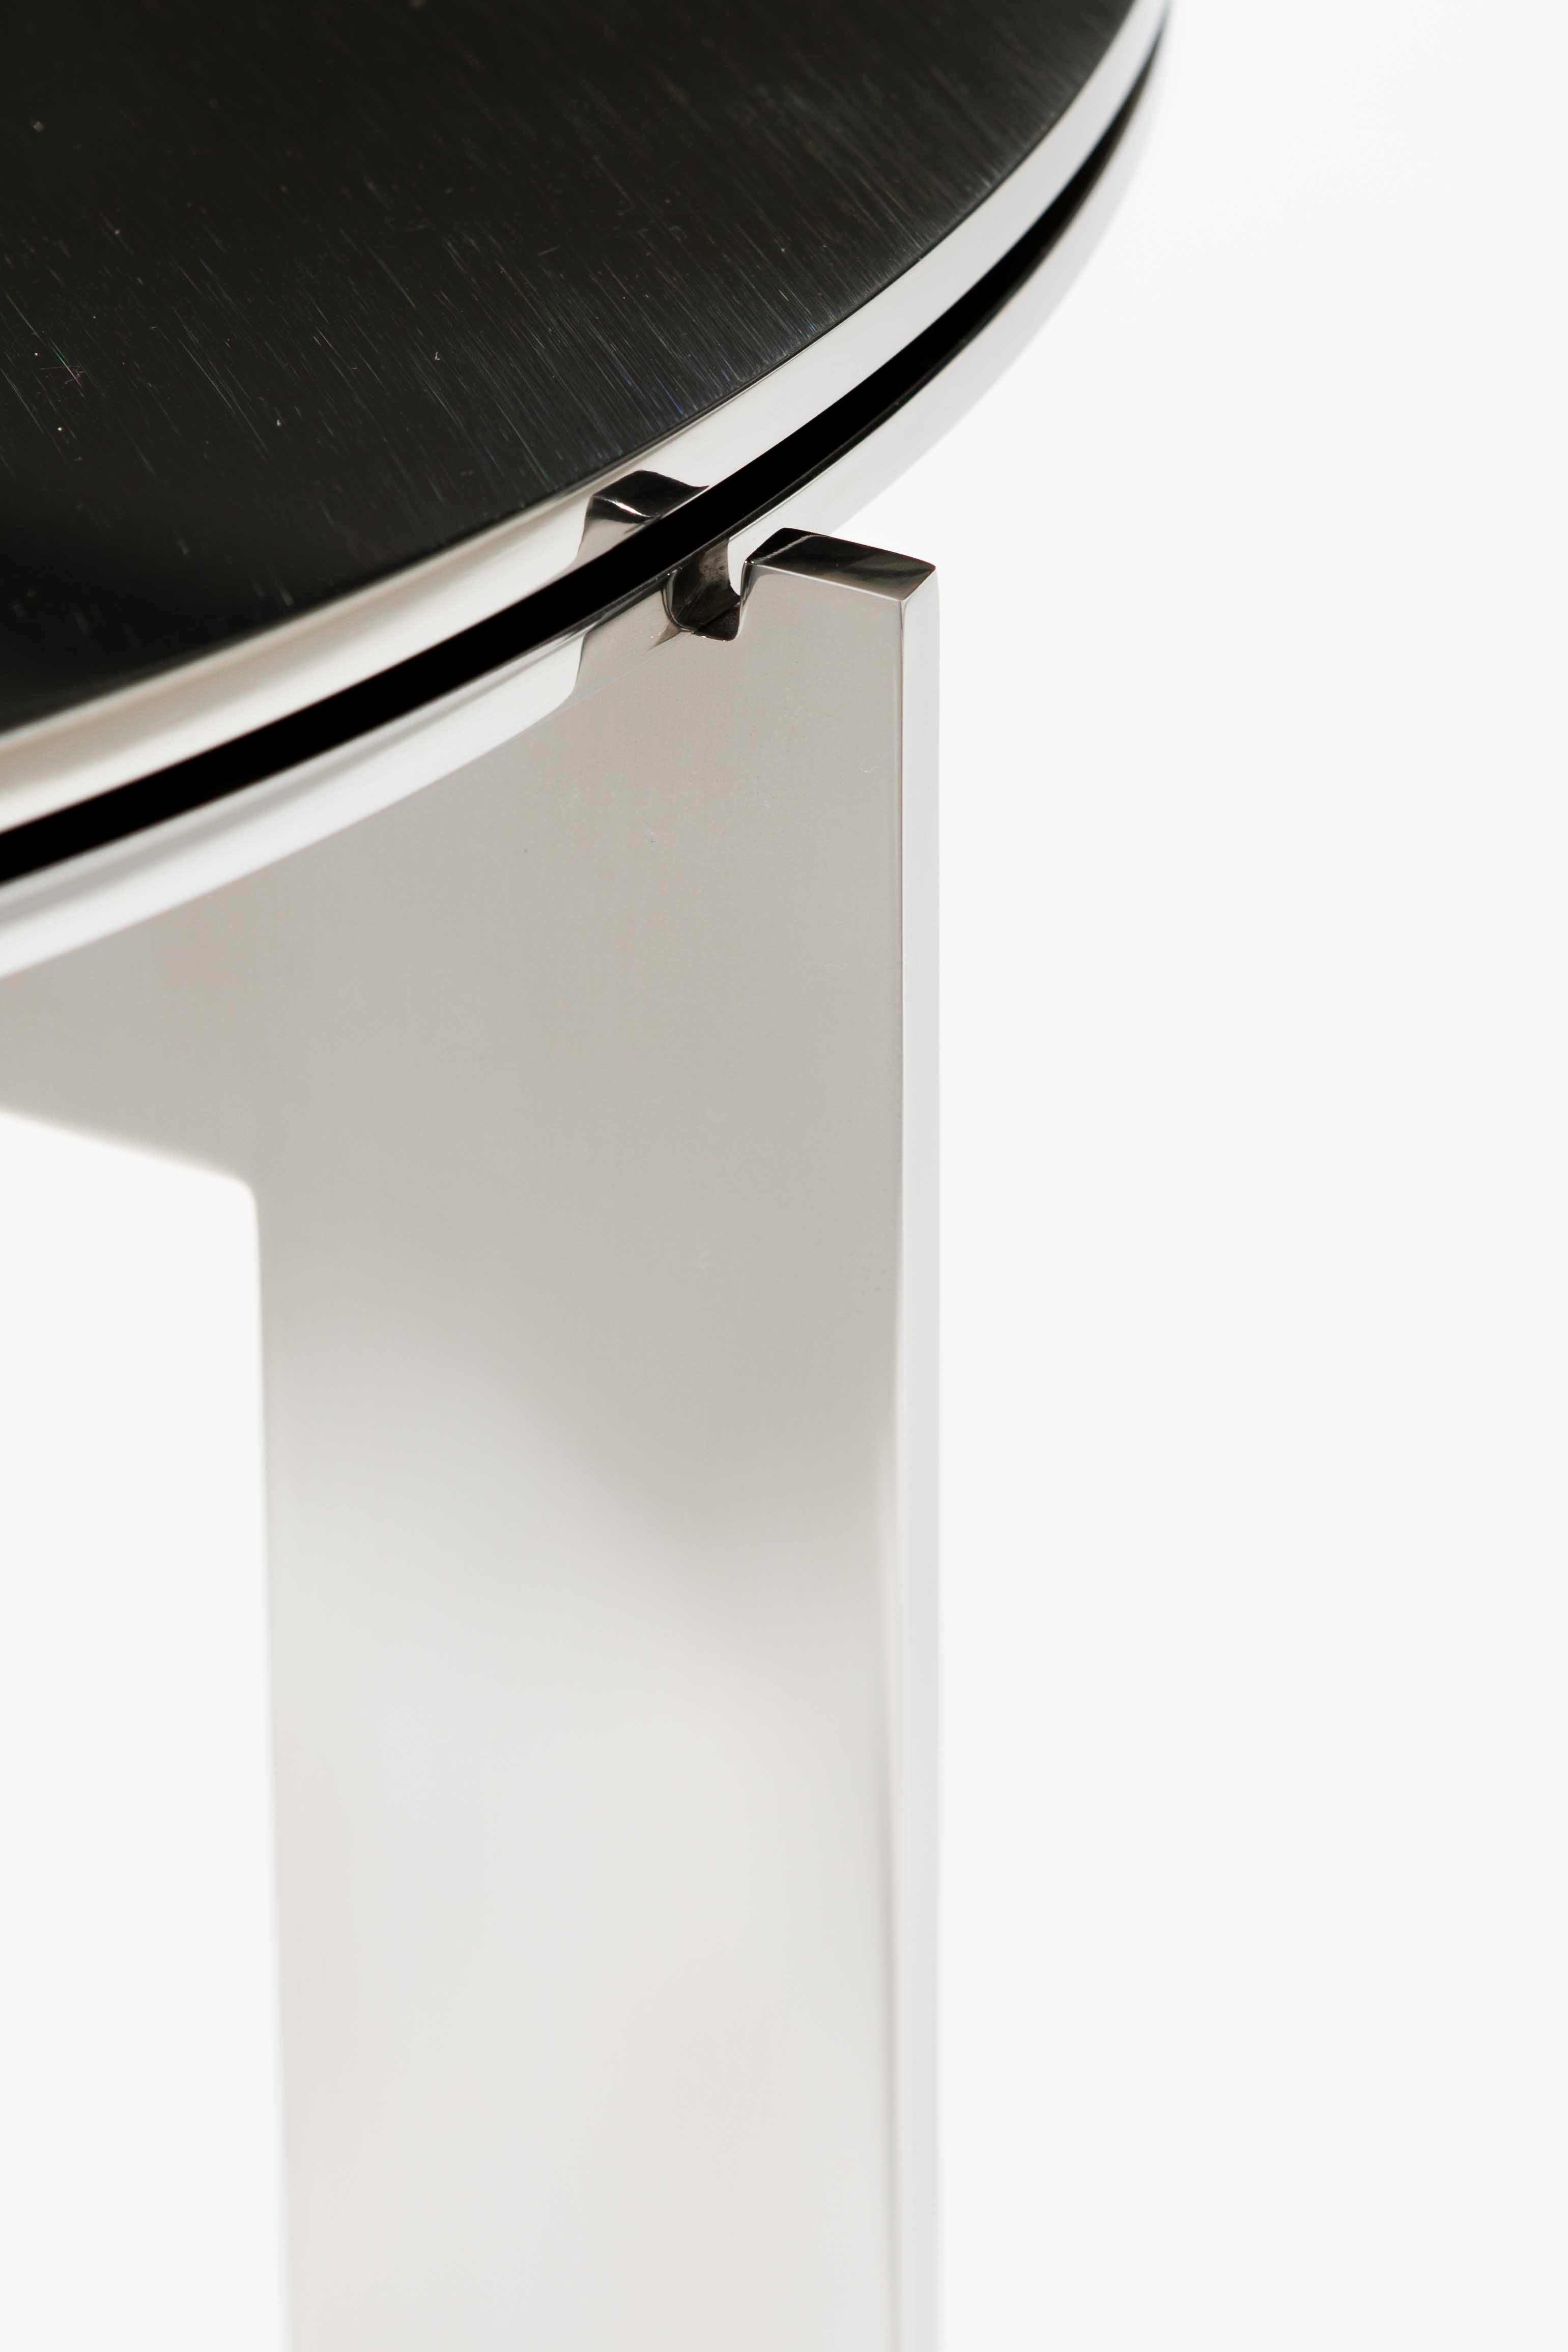 Joined is a collection of side tables. The name speaks for itself. The tables have one thing in common, they all exist around a crucial part, the joint, keeping all pieces together. 

This version: round side table with polished stainless steel base